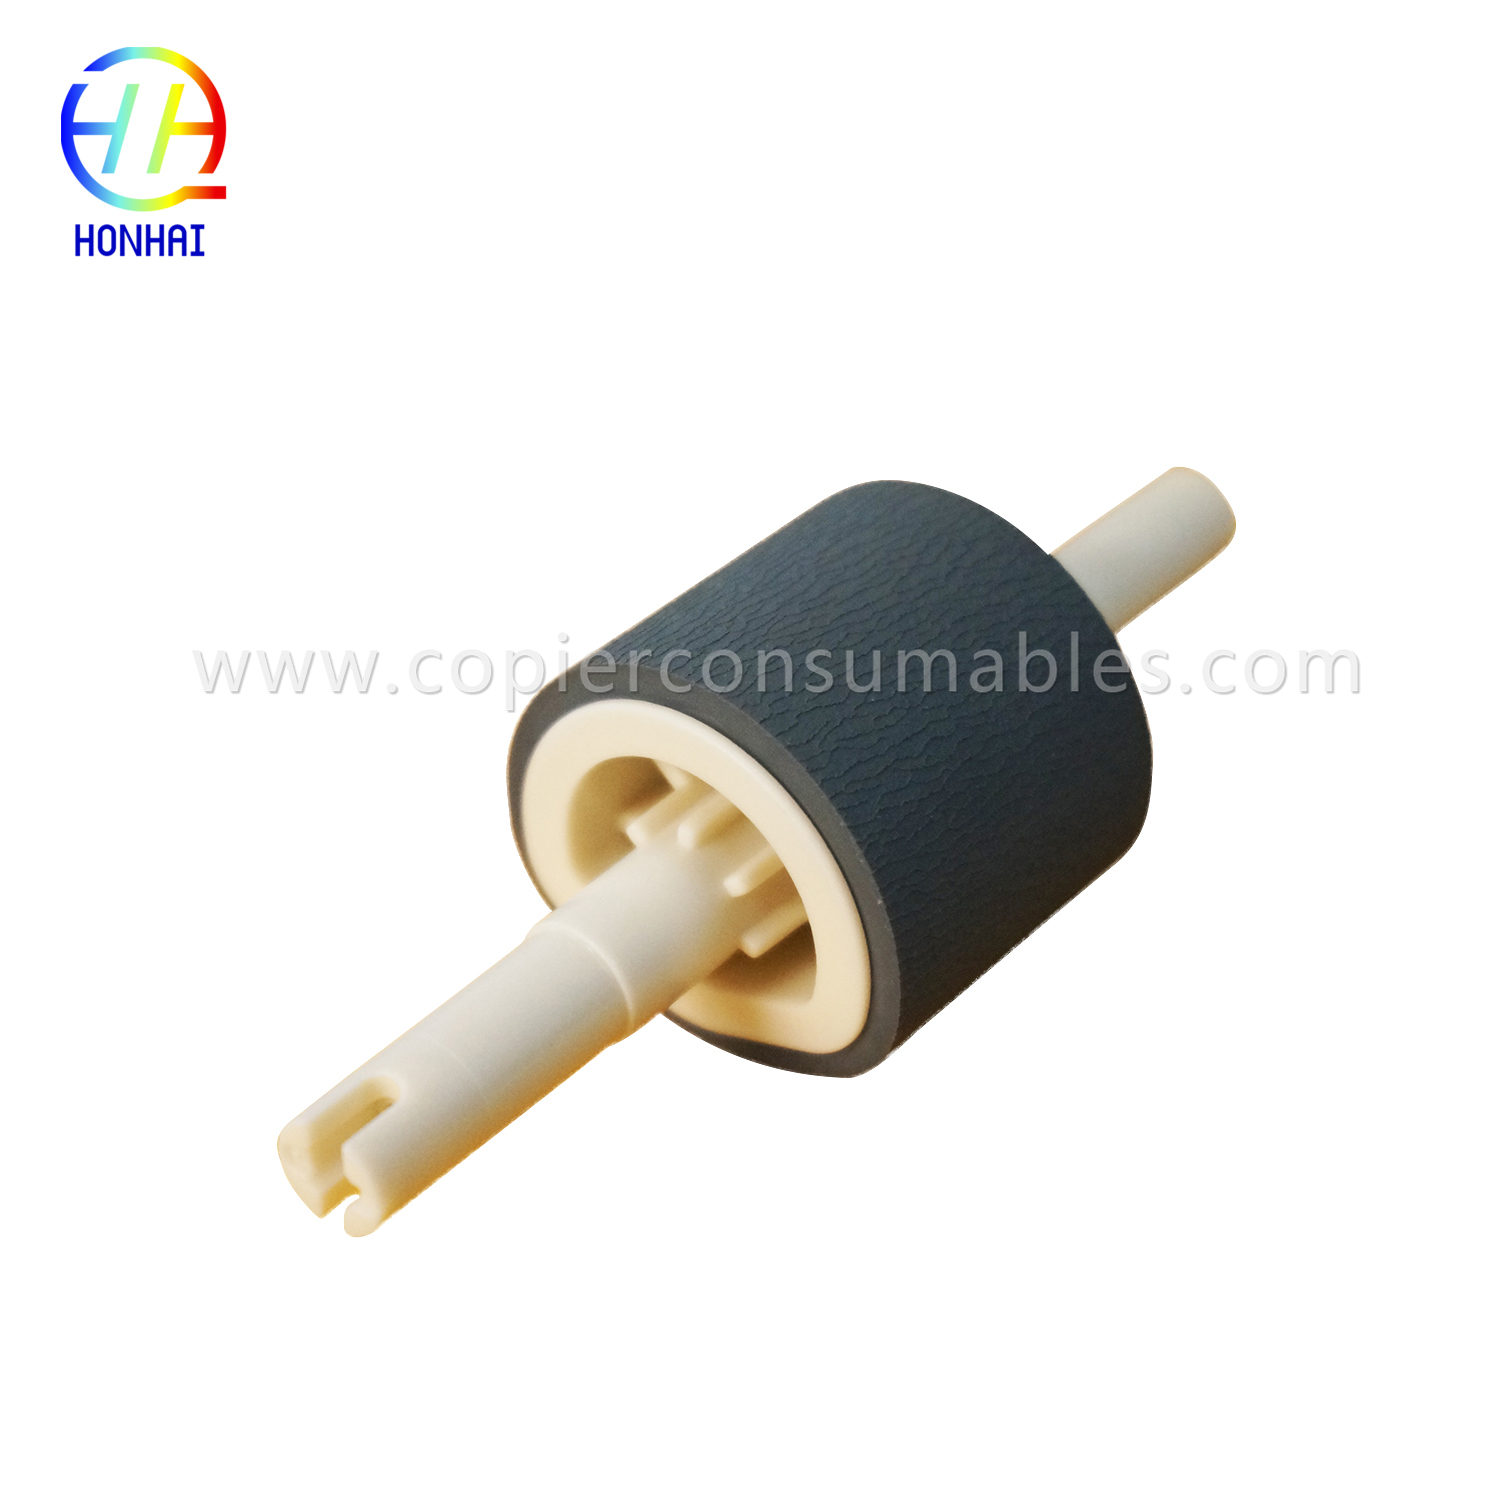 Pickup Roller Canon 1160 1320 2015 2100 2200 2300 2400 2420 2430 3300 3310 3360 3370 HP 2015 2400 2420 3005 蝴1-1